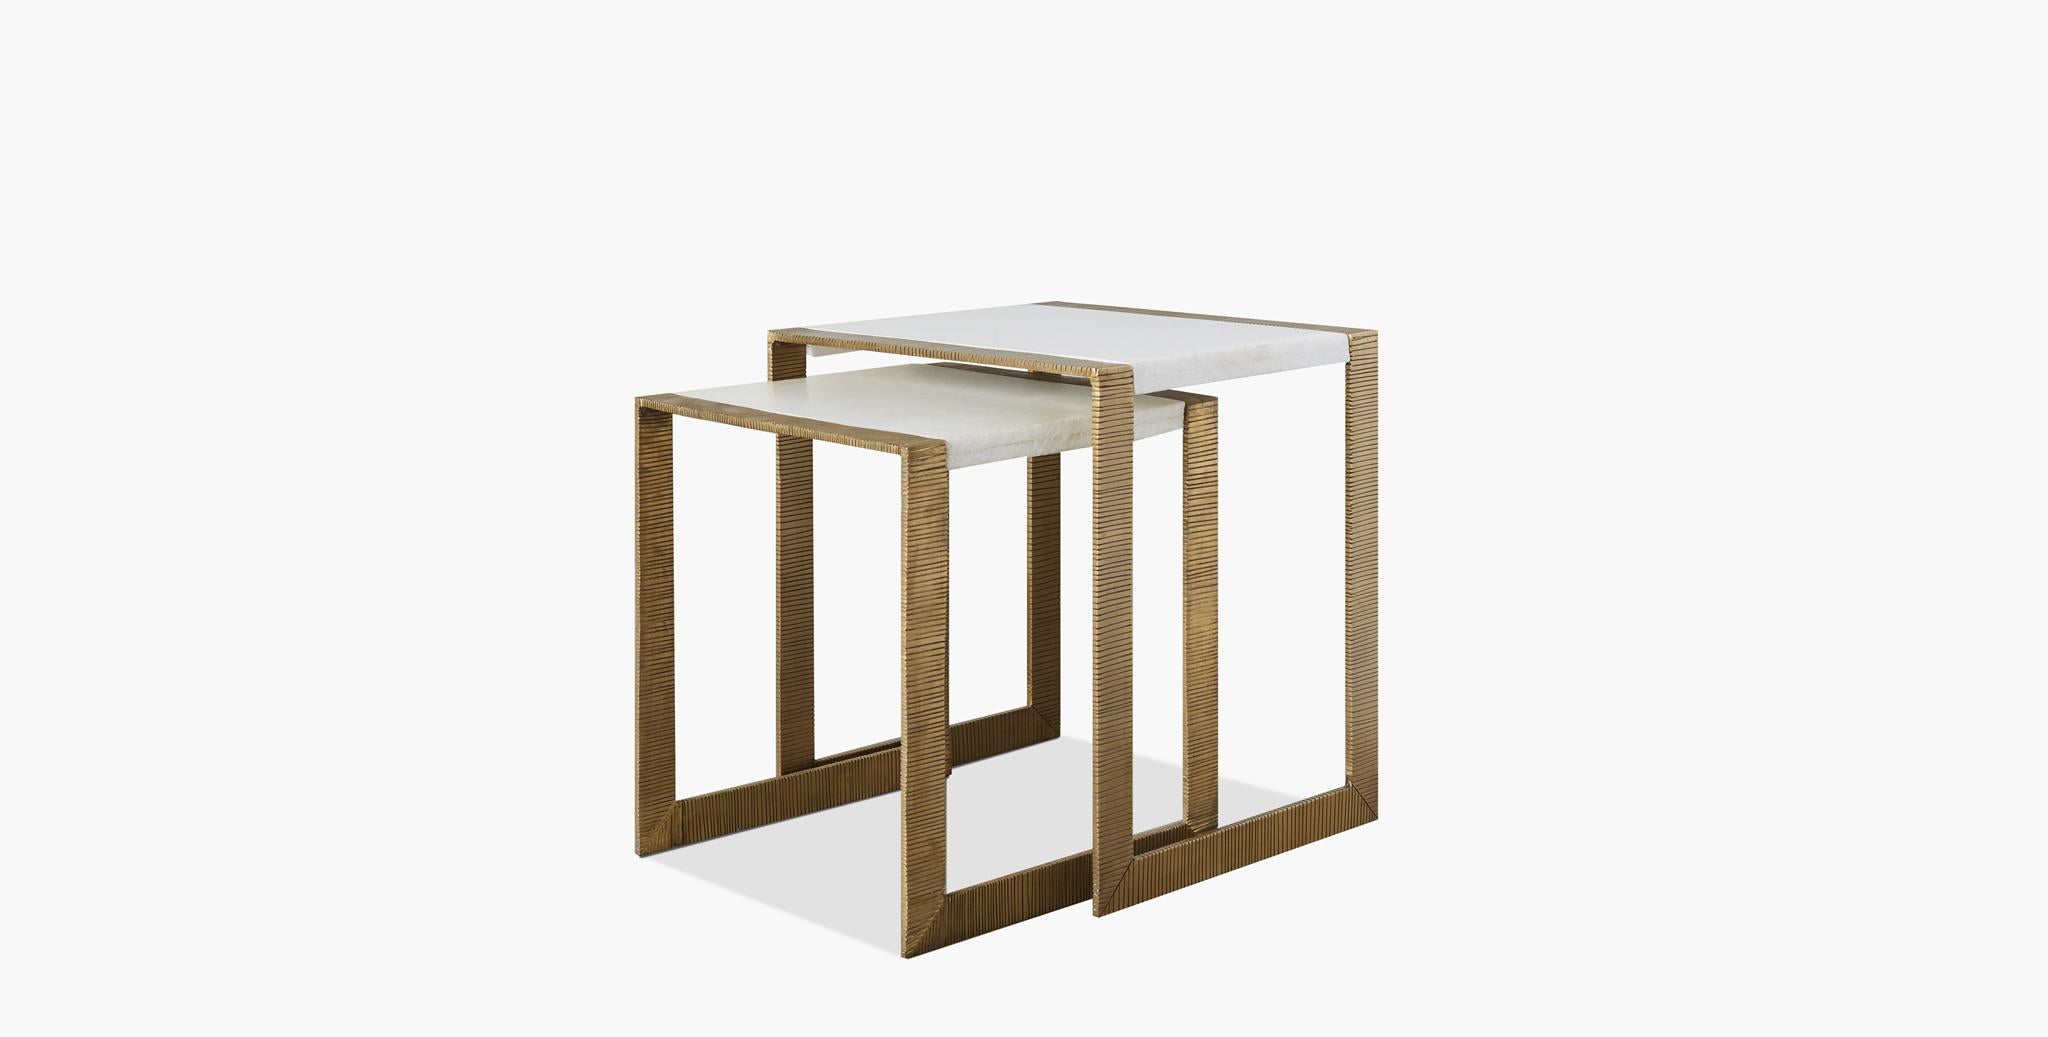 The svelte Hawthorn nesting tables have an open brass U-leg base with clean lines paired with a contemporary white stone with chiseled edges.

Dimensions:
Large table width 20”, depth 18”, height 22.25”
Small table width 18”, depth 117.75”,